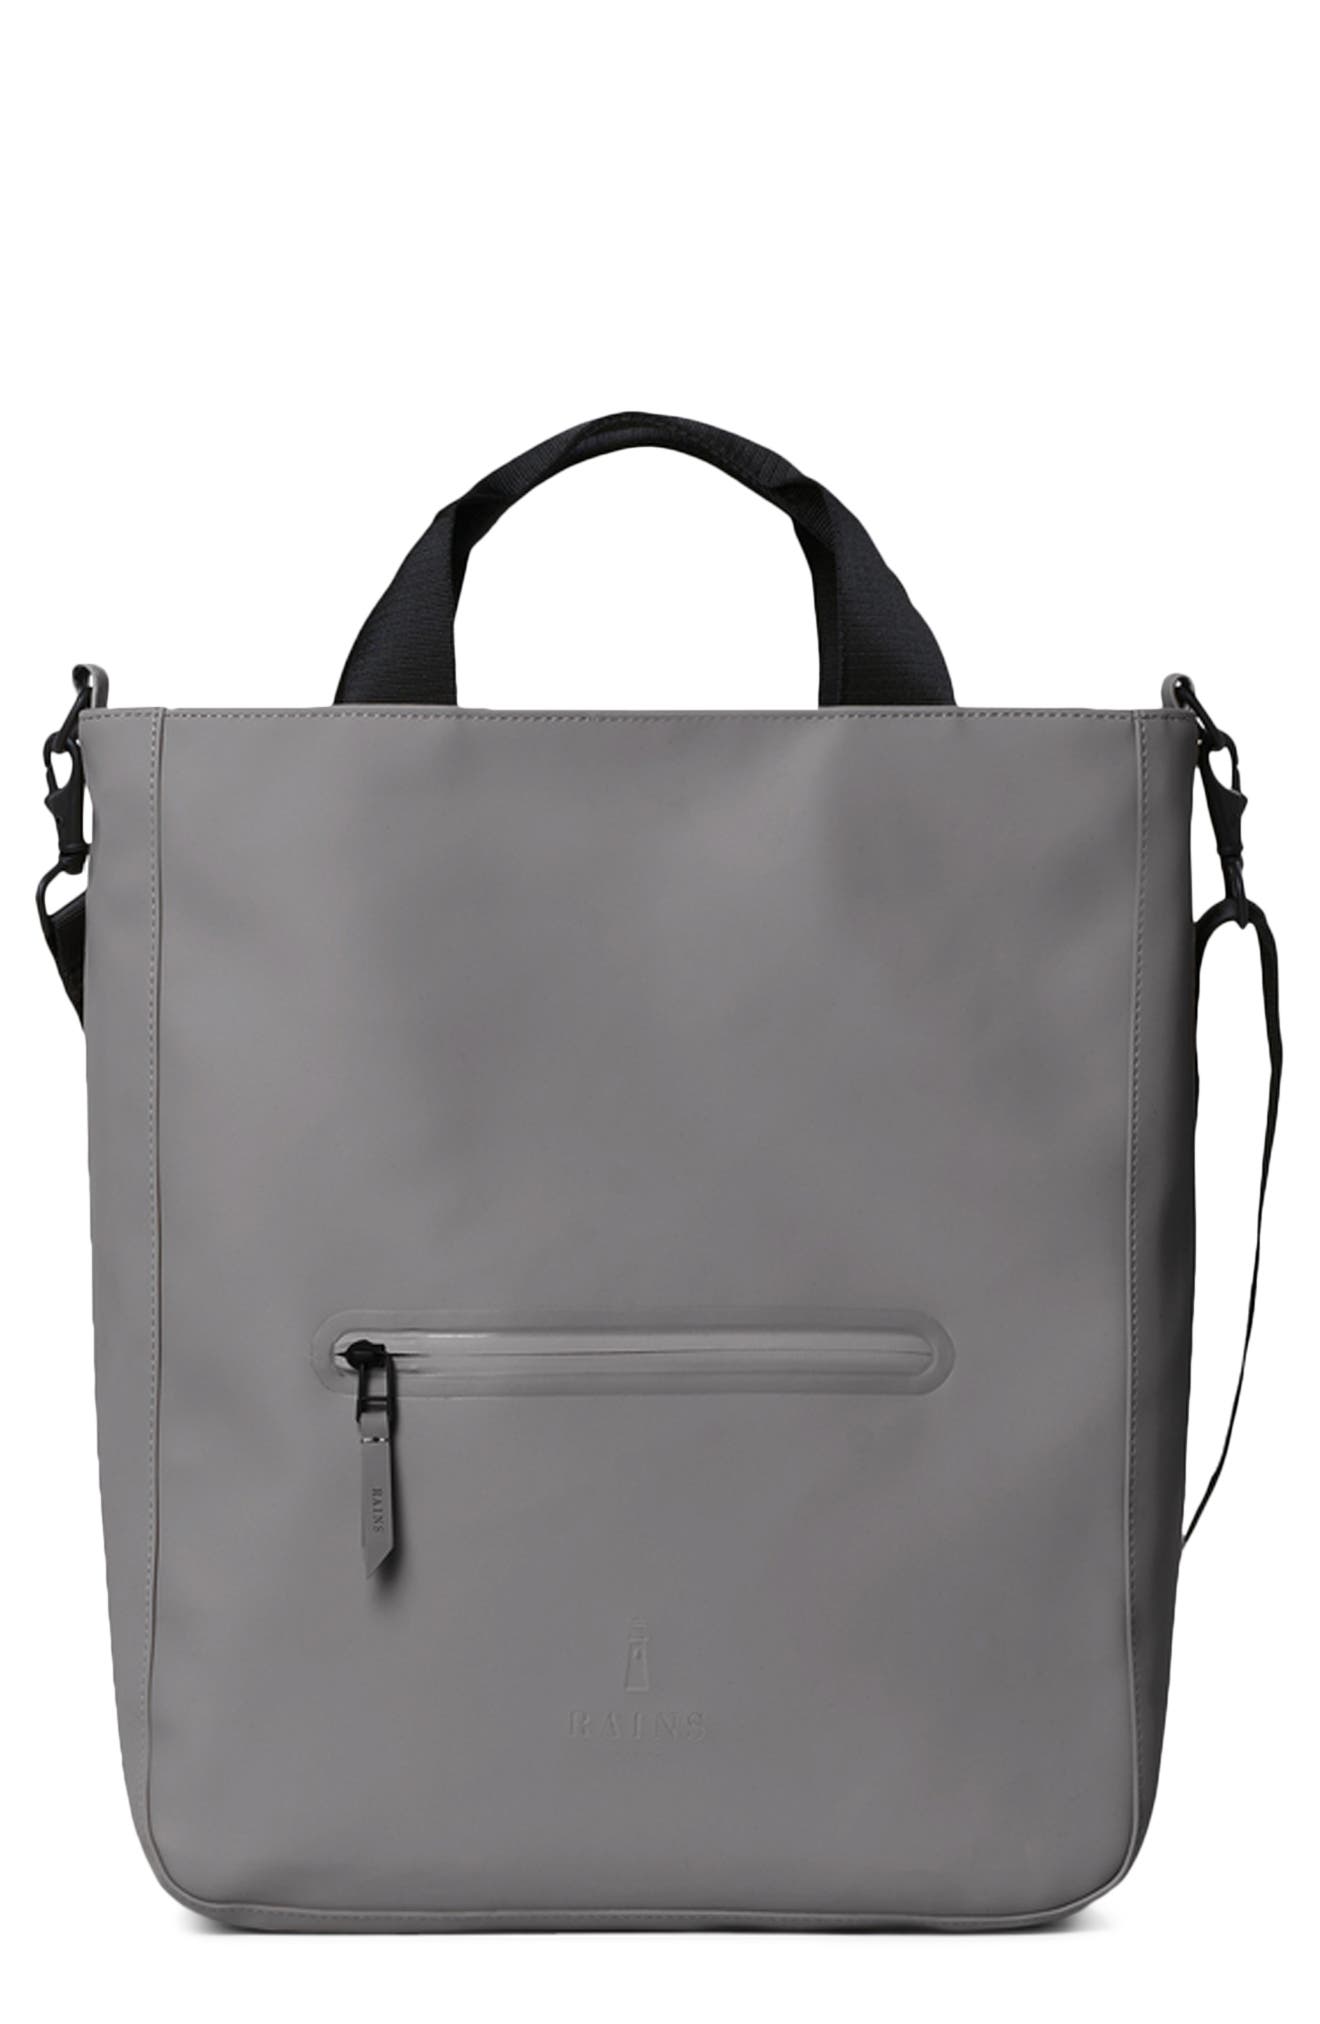 Rains Water Resistant Tote In Charcoal